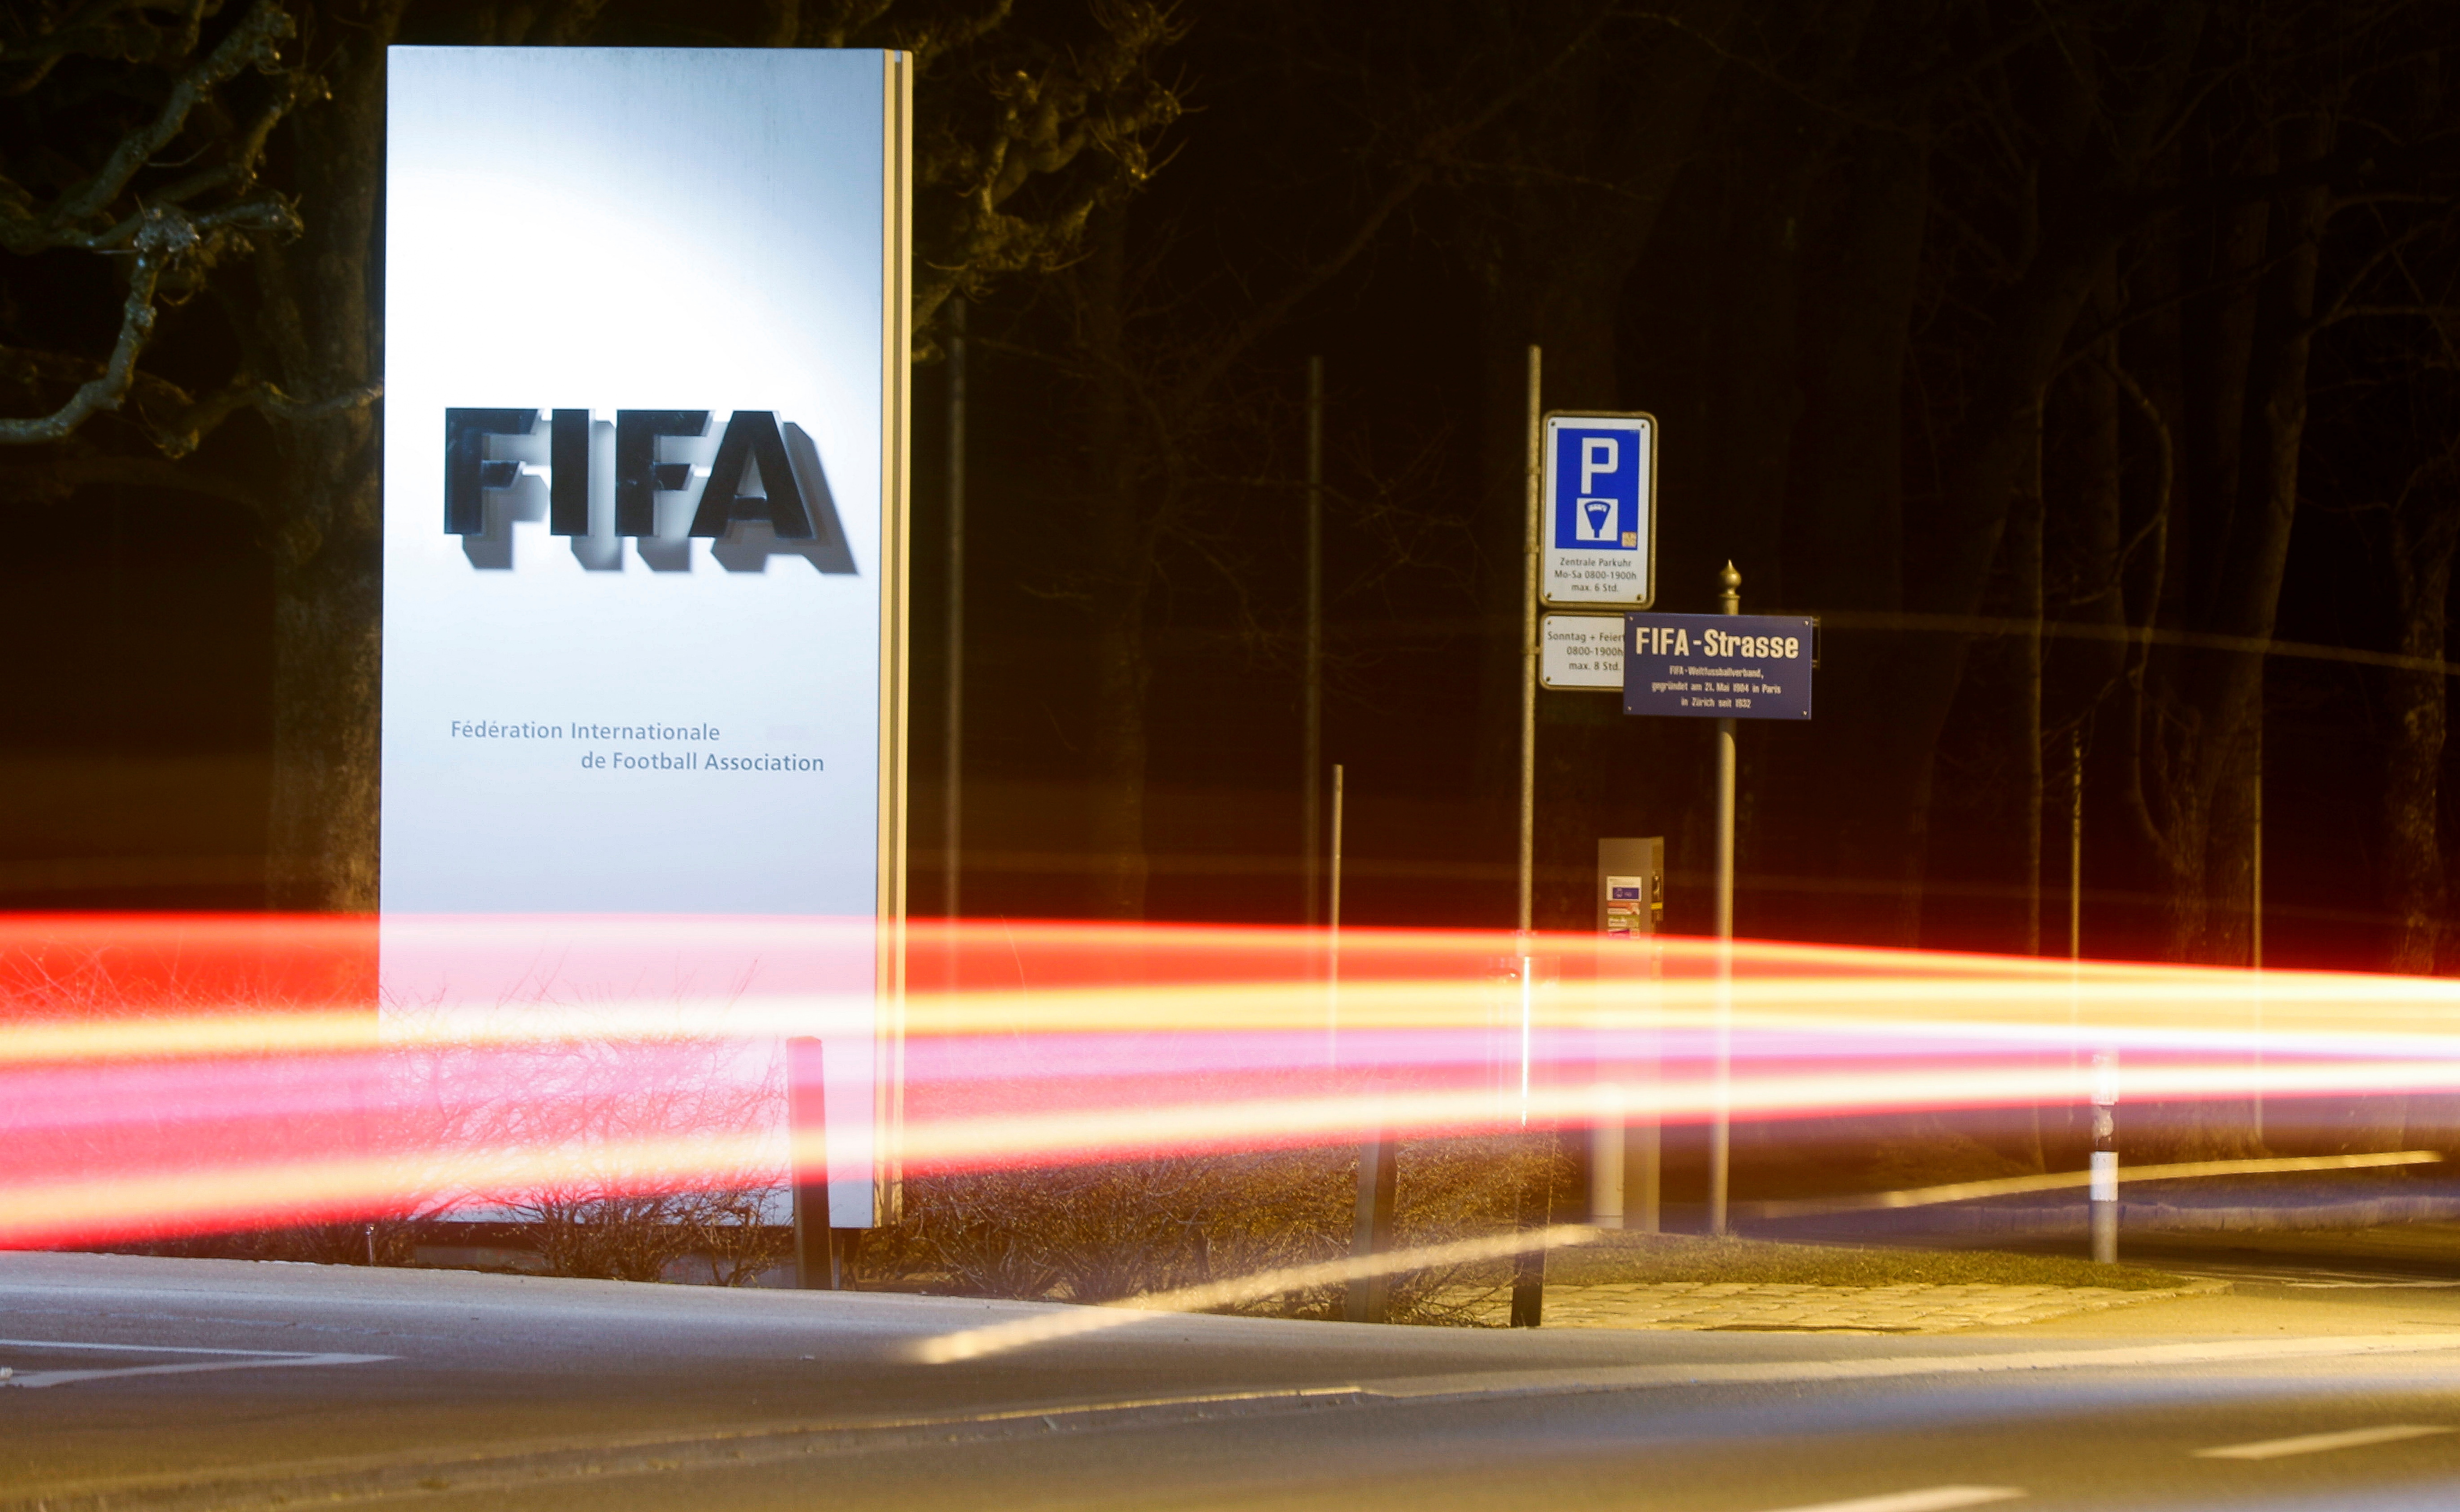 A long exposure shows FIFA's logo near its headquarters in Zurich